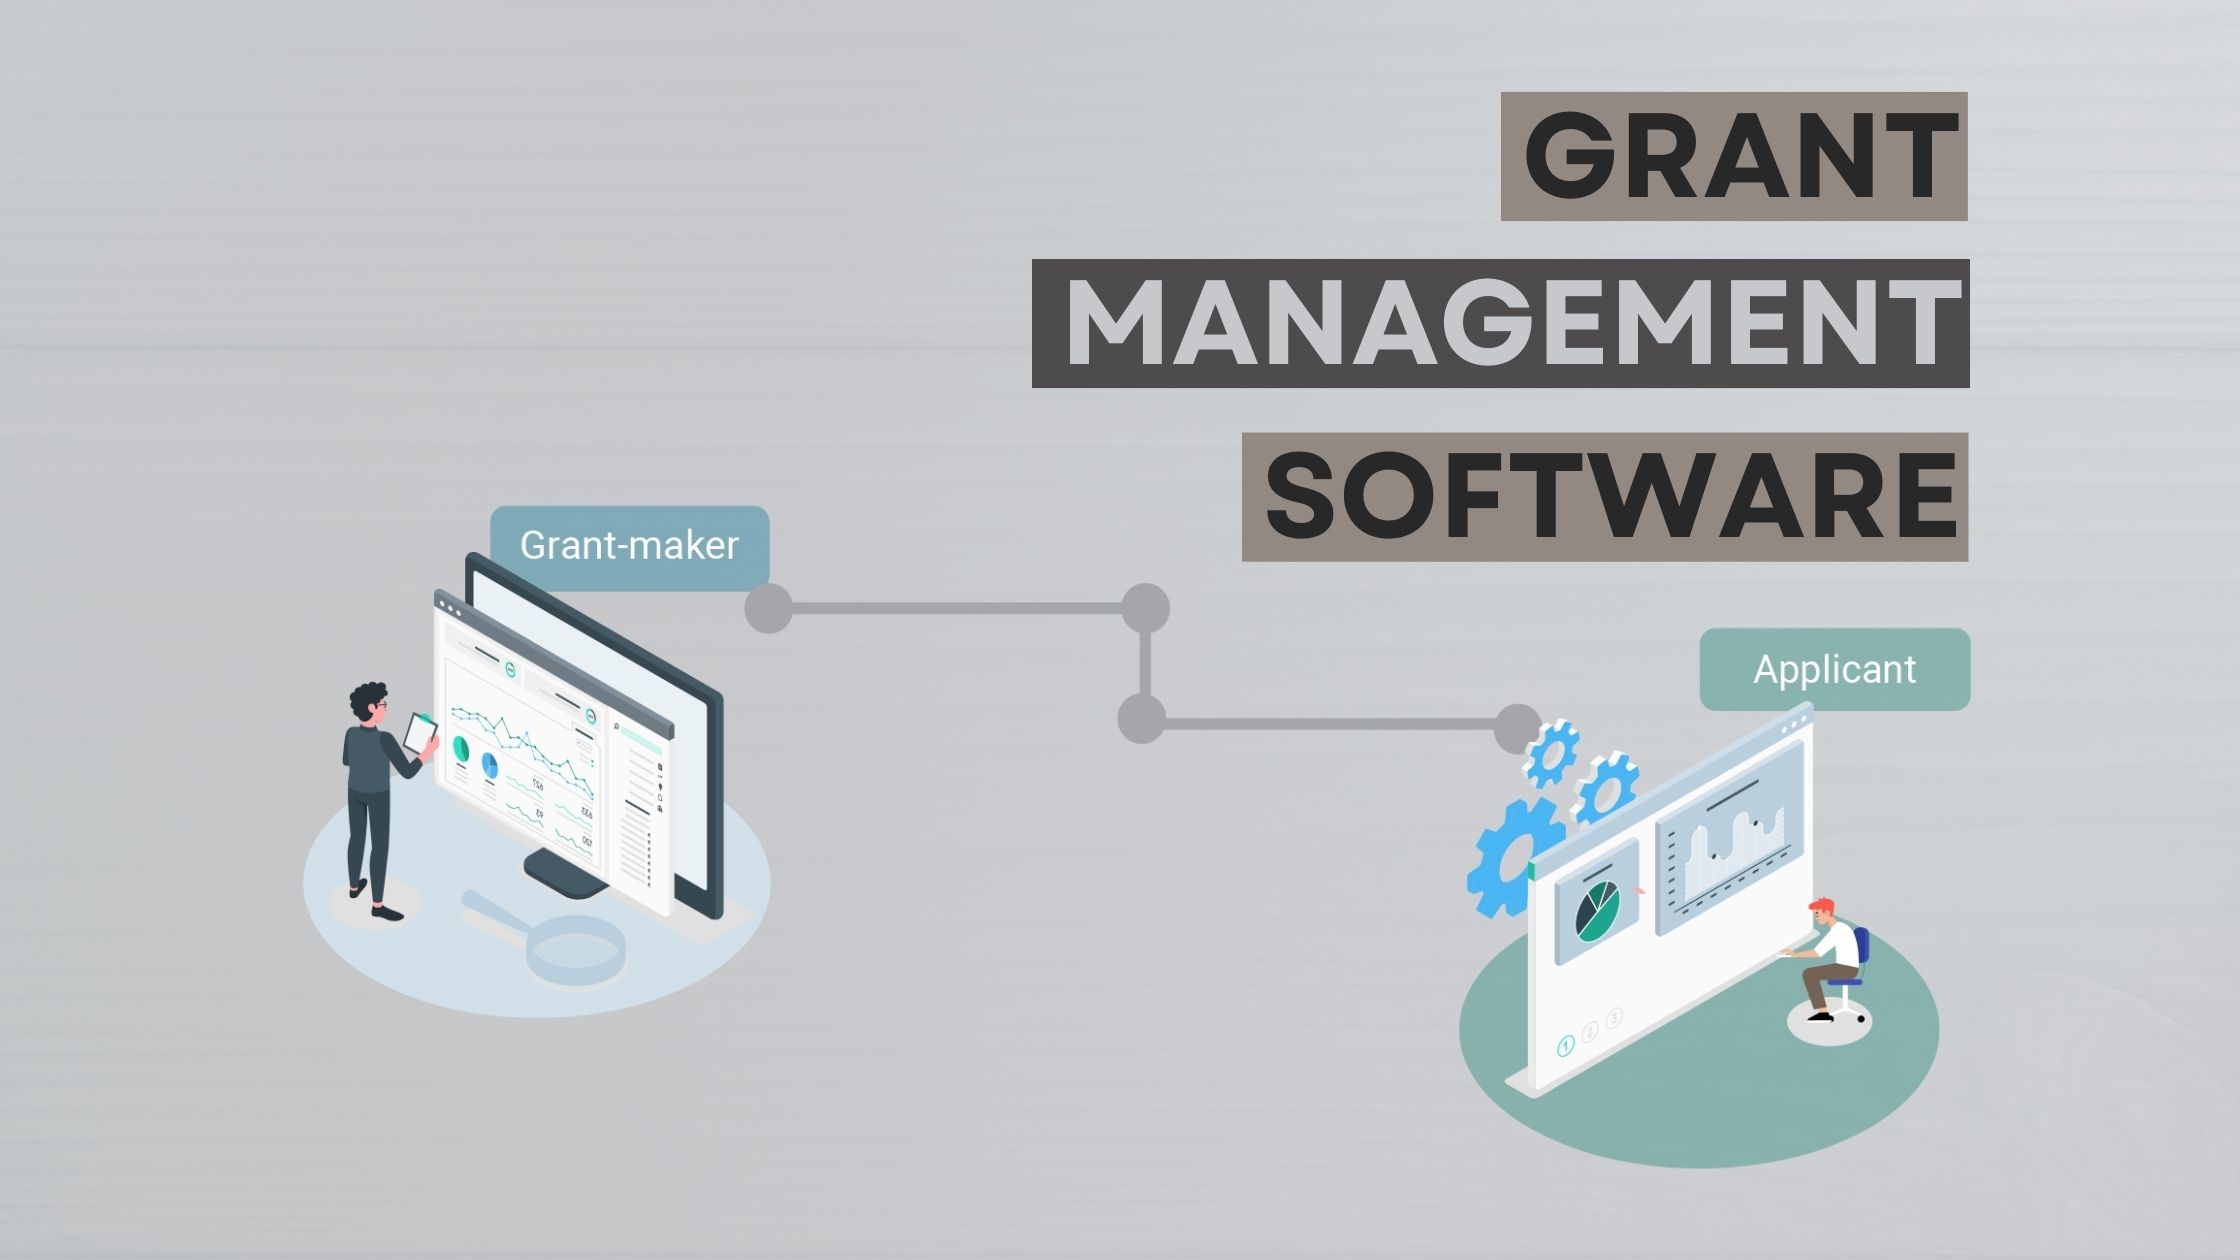 What Makes Grant Management Software For Foundations So Useful?